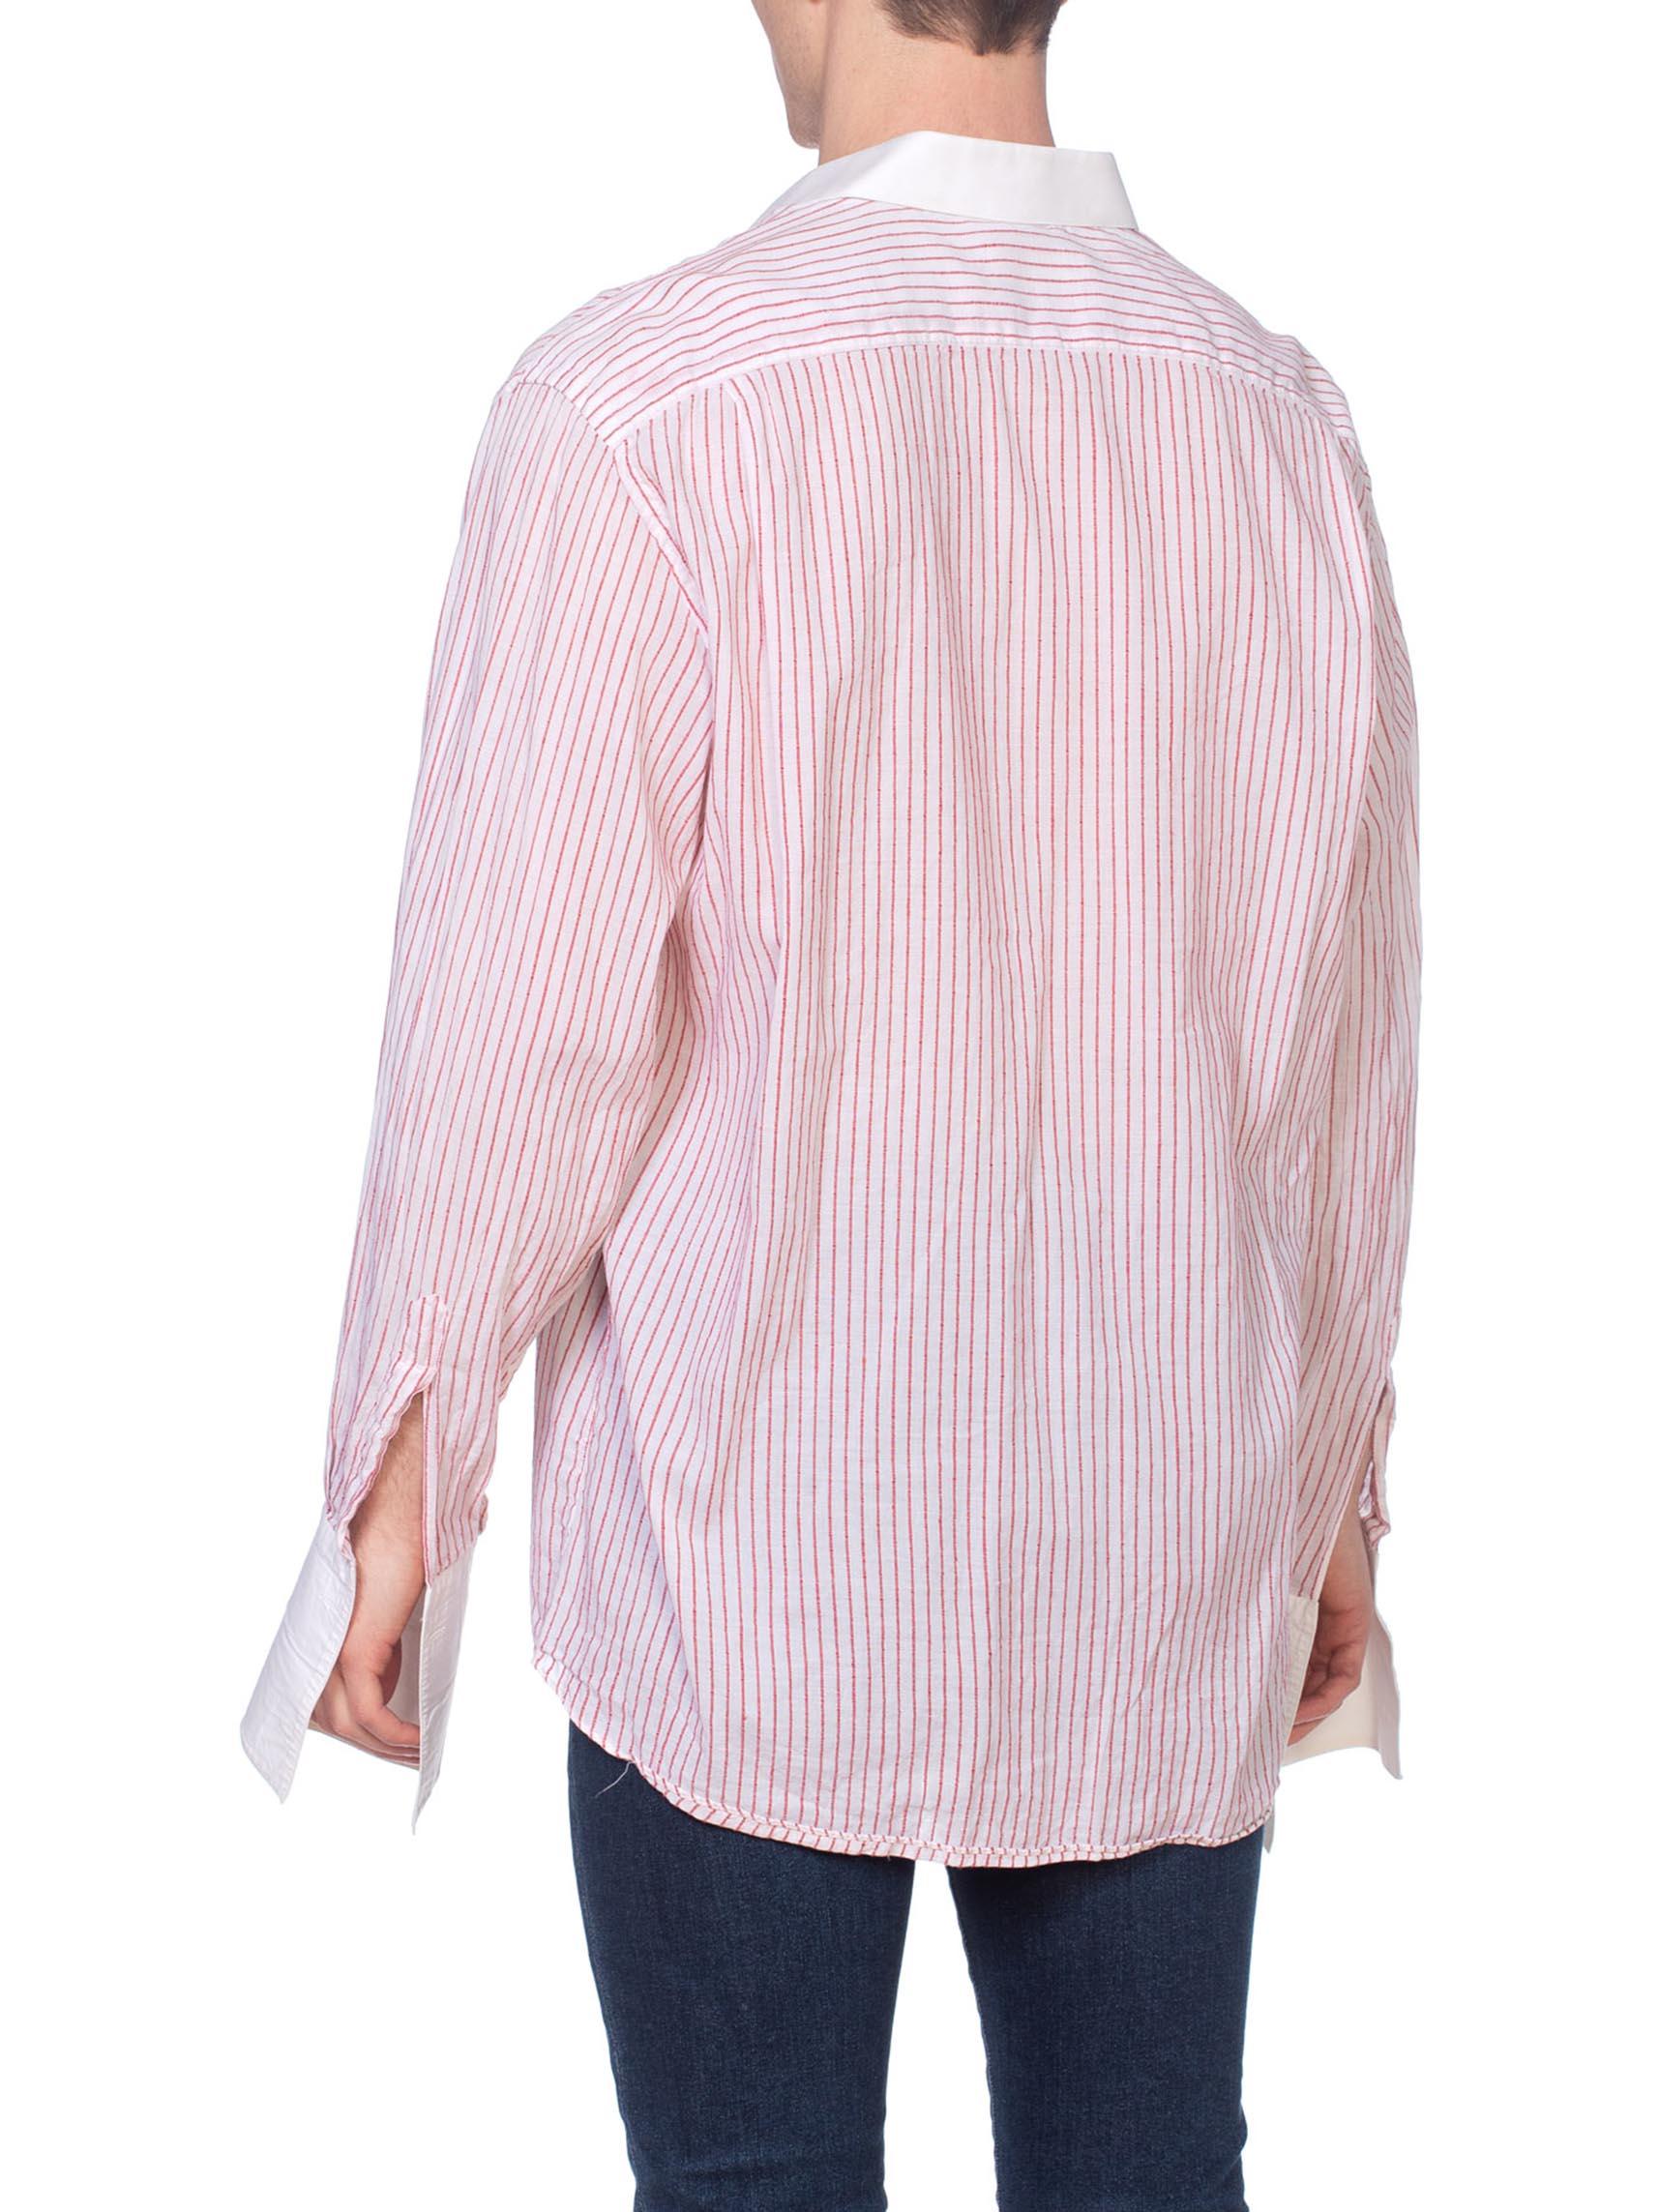 1970'S ARTIOLI Red & White Cotton Bespoke Men's  Shirt With French Cuffs In Excellent Condition For Sale In New York, NY